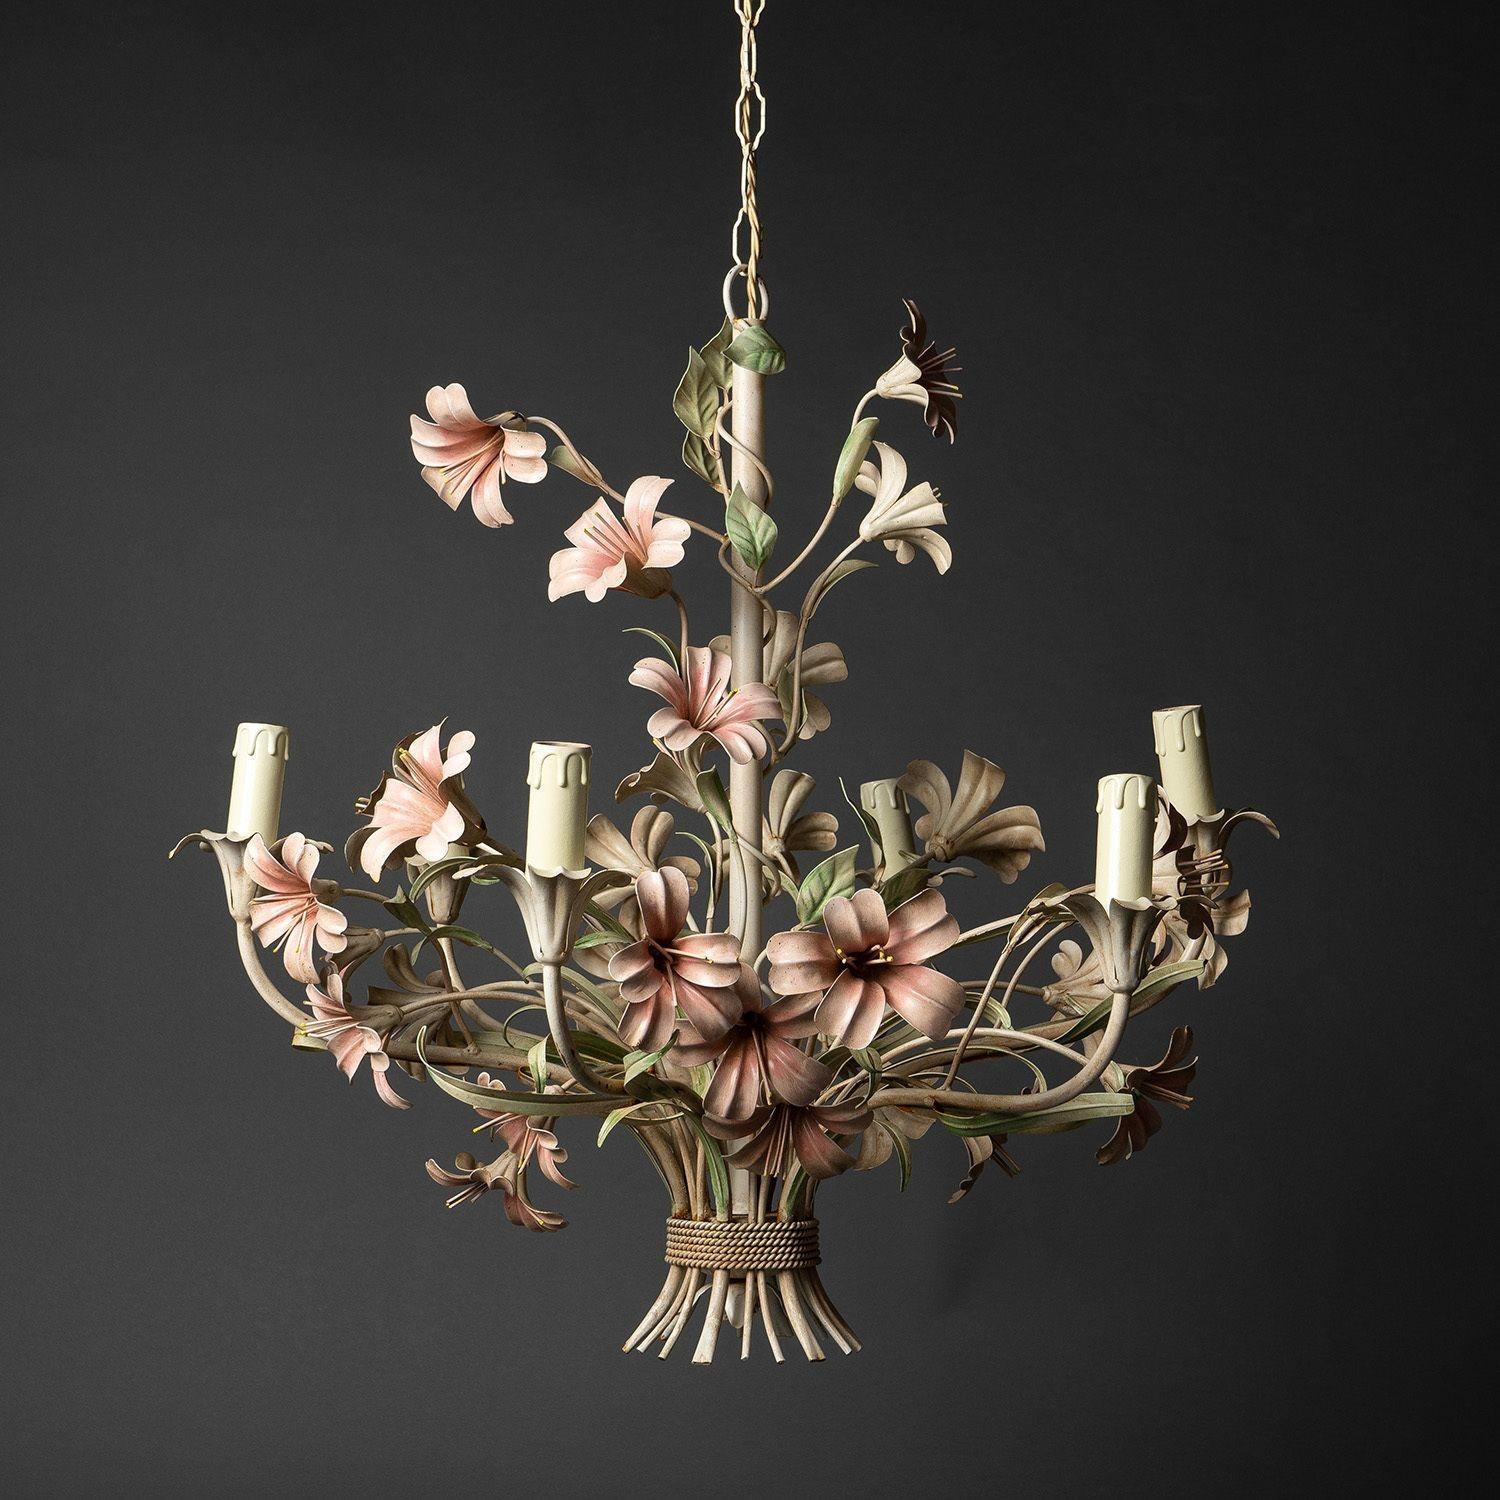 Vintage tole Peinte six branch pendant chandelier
Beautifully painted in pastel shades. An abundance of tropical hibiscus flowers in amongst organic foliage.
 
Probably dating from the 1950s period.
 
All of our lighting has been safety checked